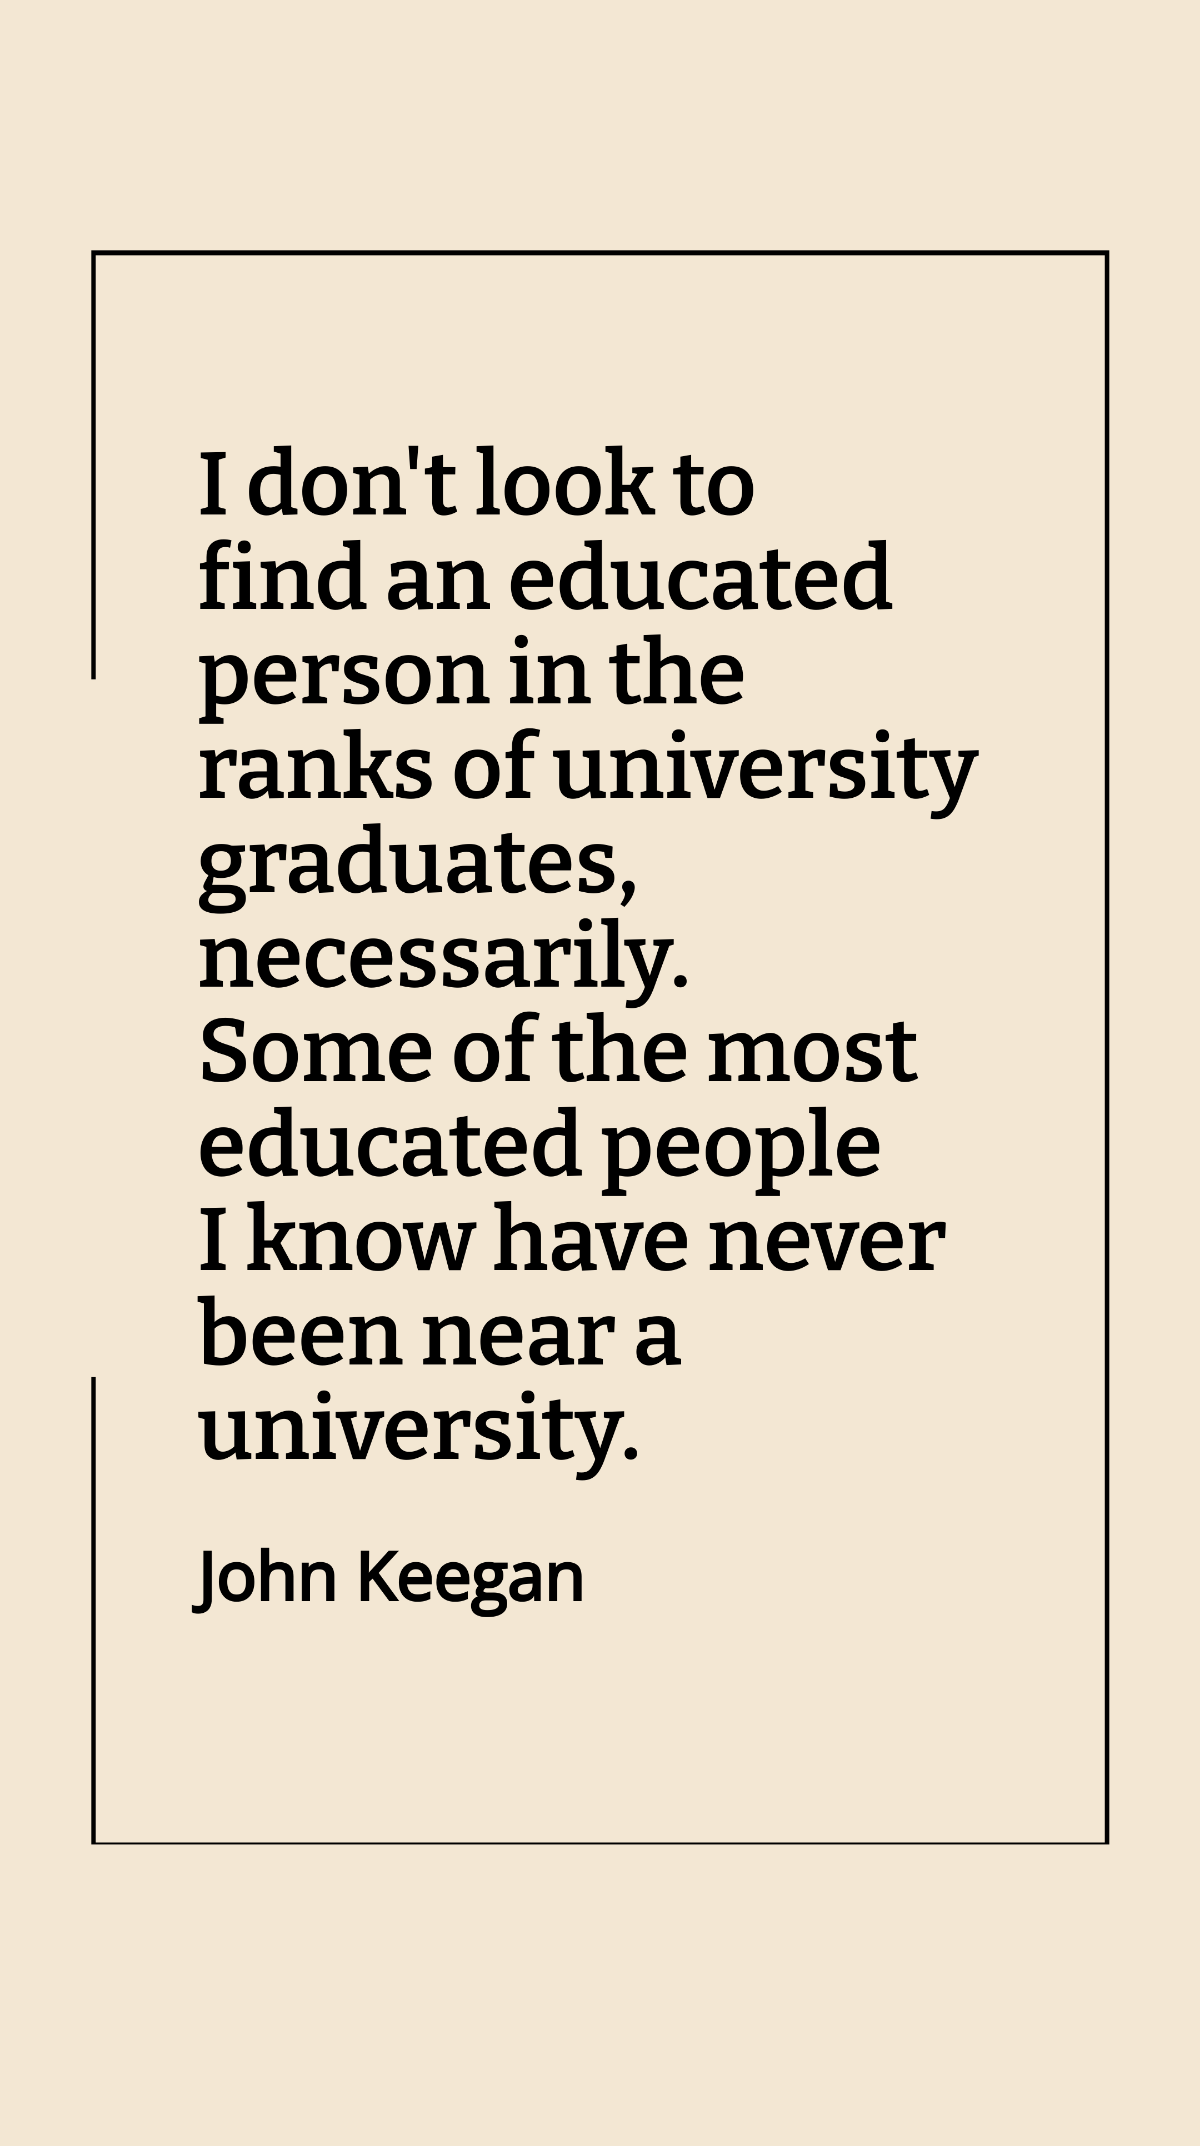 John Keegan - I don't look to find an educated person in the ranks of university graduates, necessarily. Some of the most educated people I know have never been near a university.